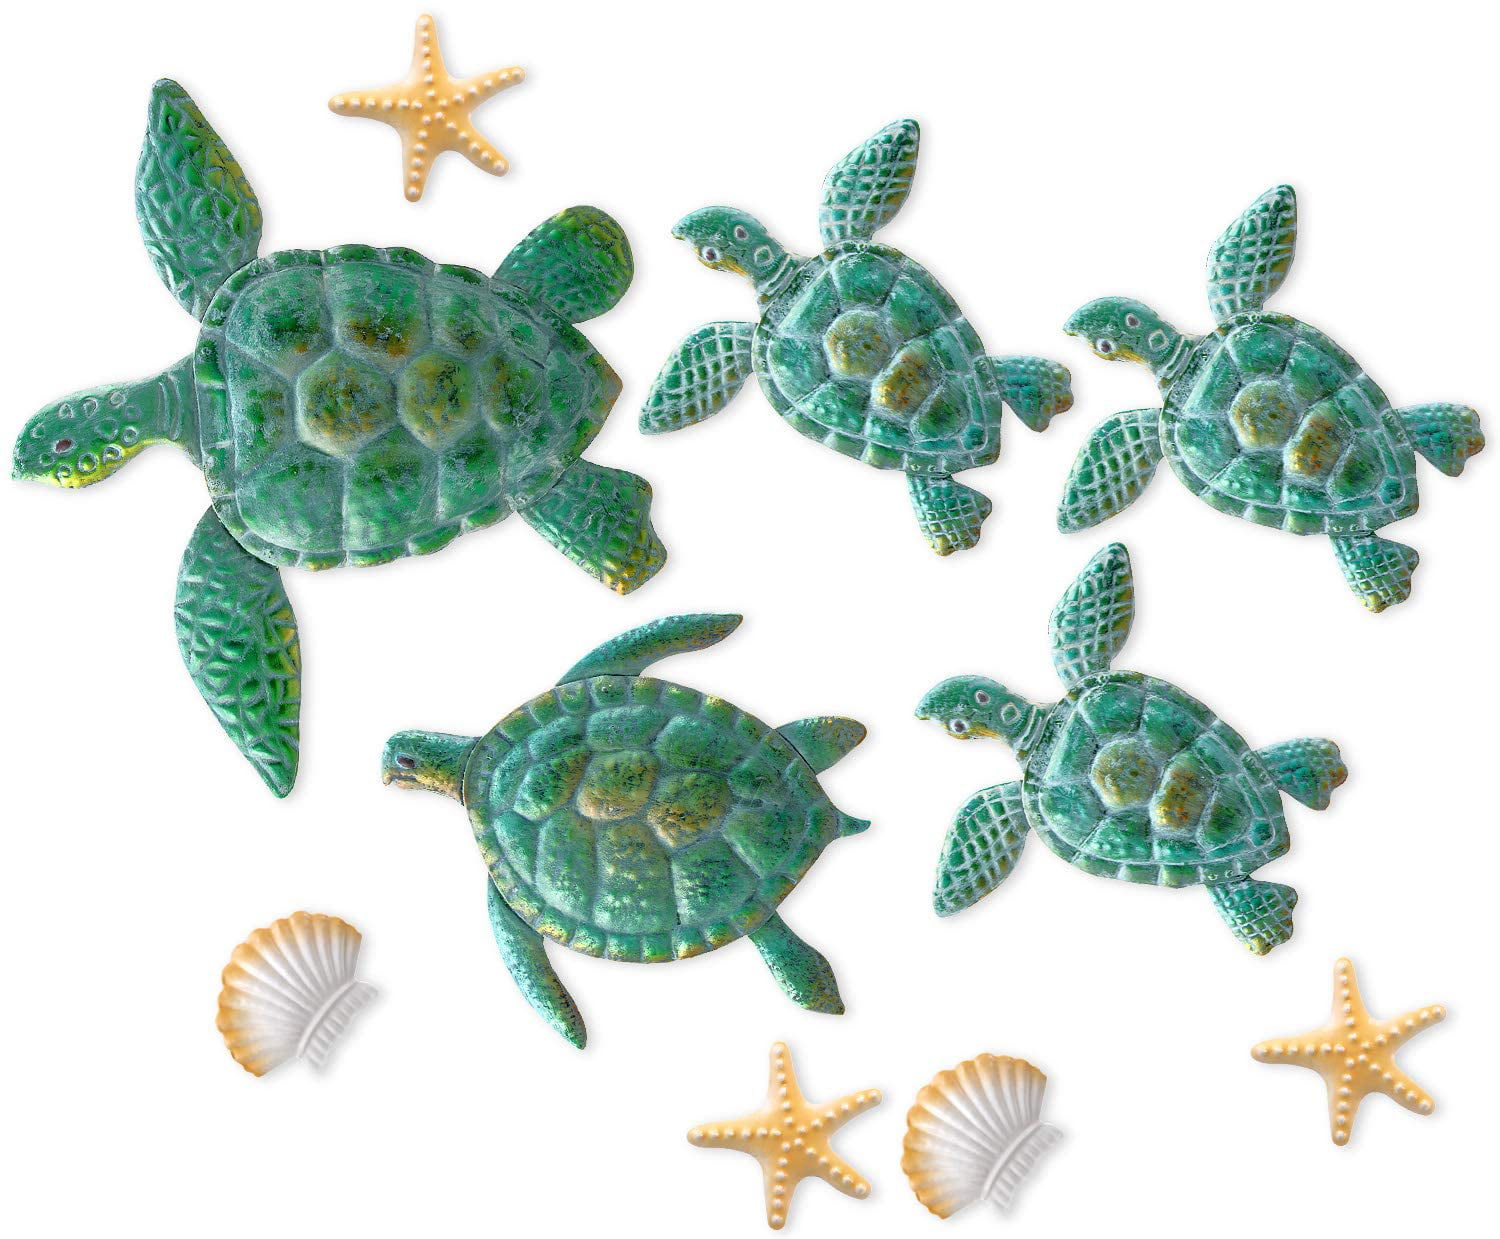 10 Pieces Sea Turtle Wall Decoration Starfish Ornaments Shell Wall Ornaments  for Indoor Outdoor Garden Wall Sculptures (Peacock Blue) - Walmart.com